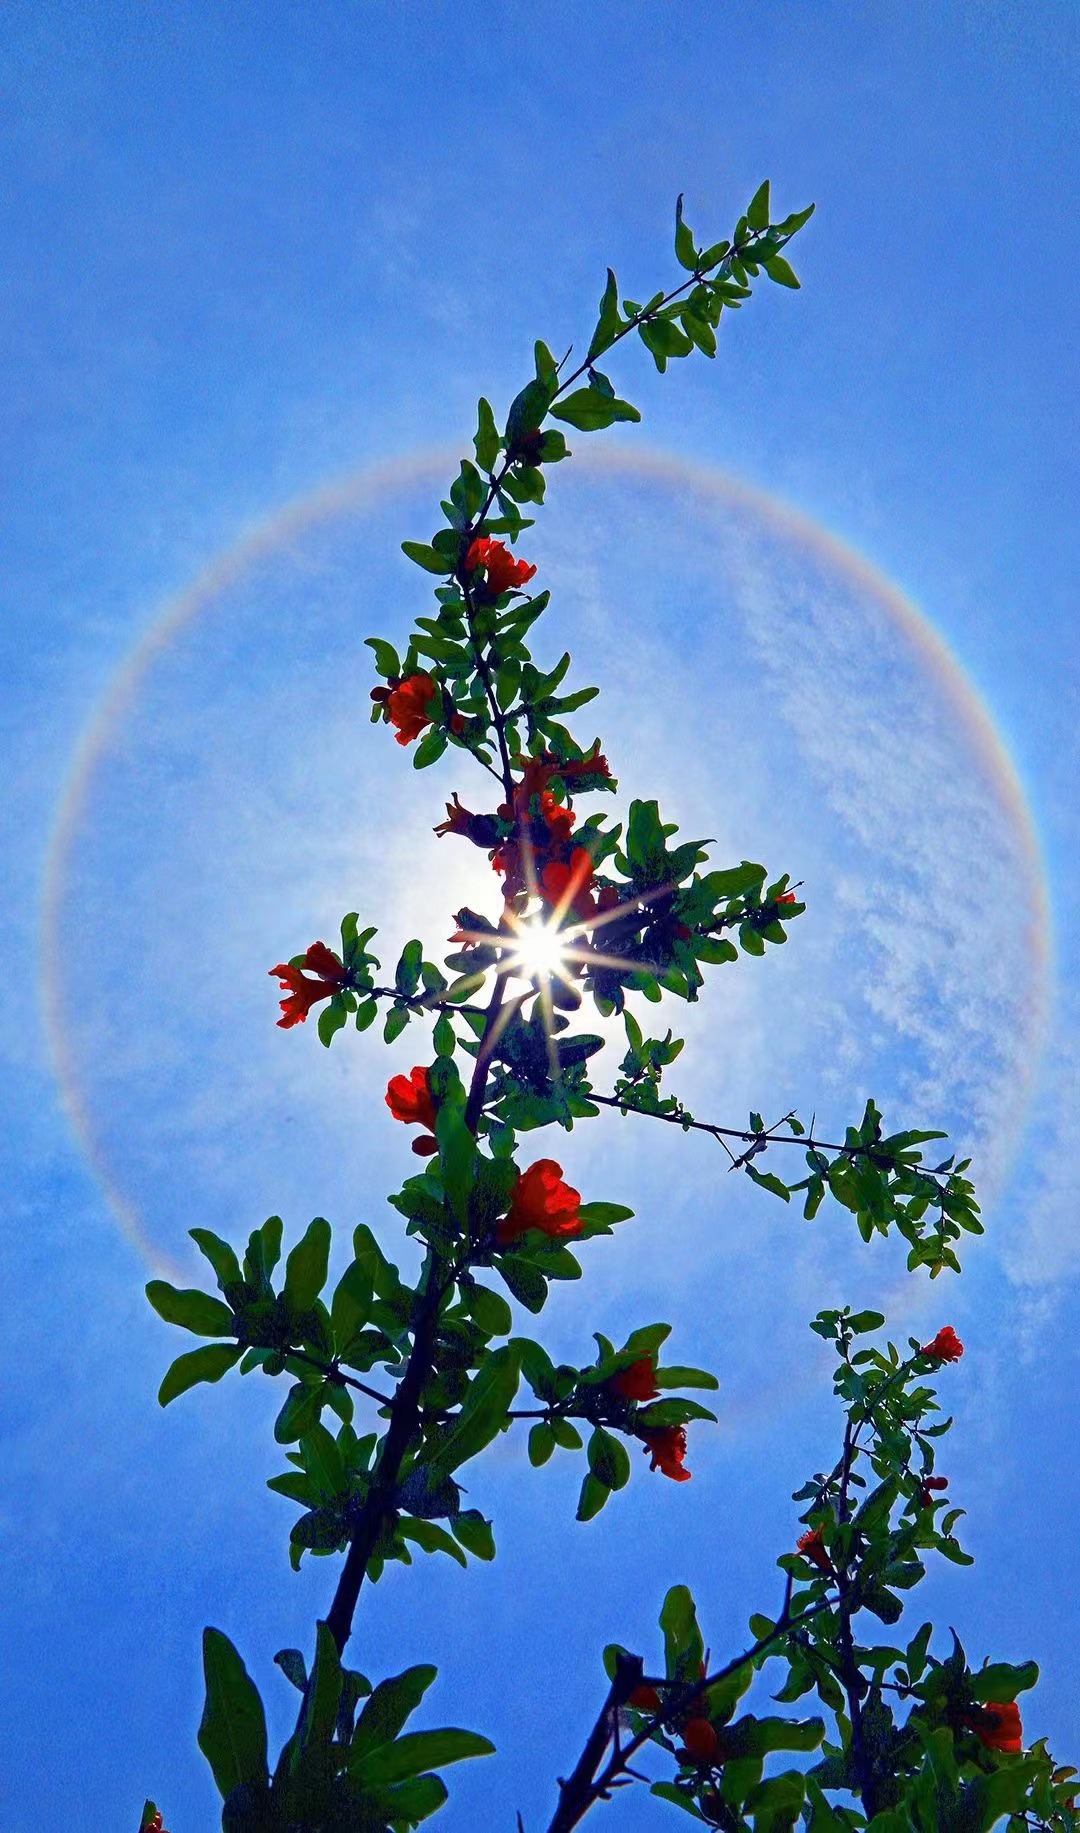 Solar Halo Shines over Linyi_fororder_1